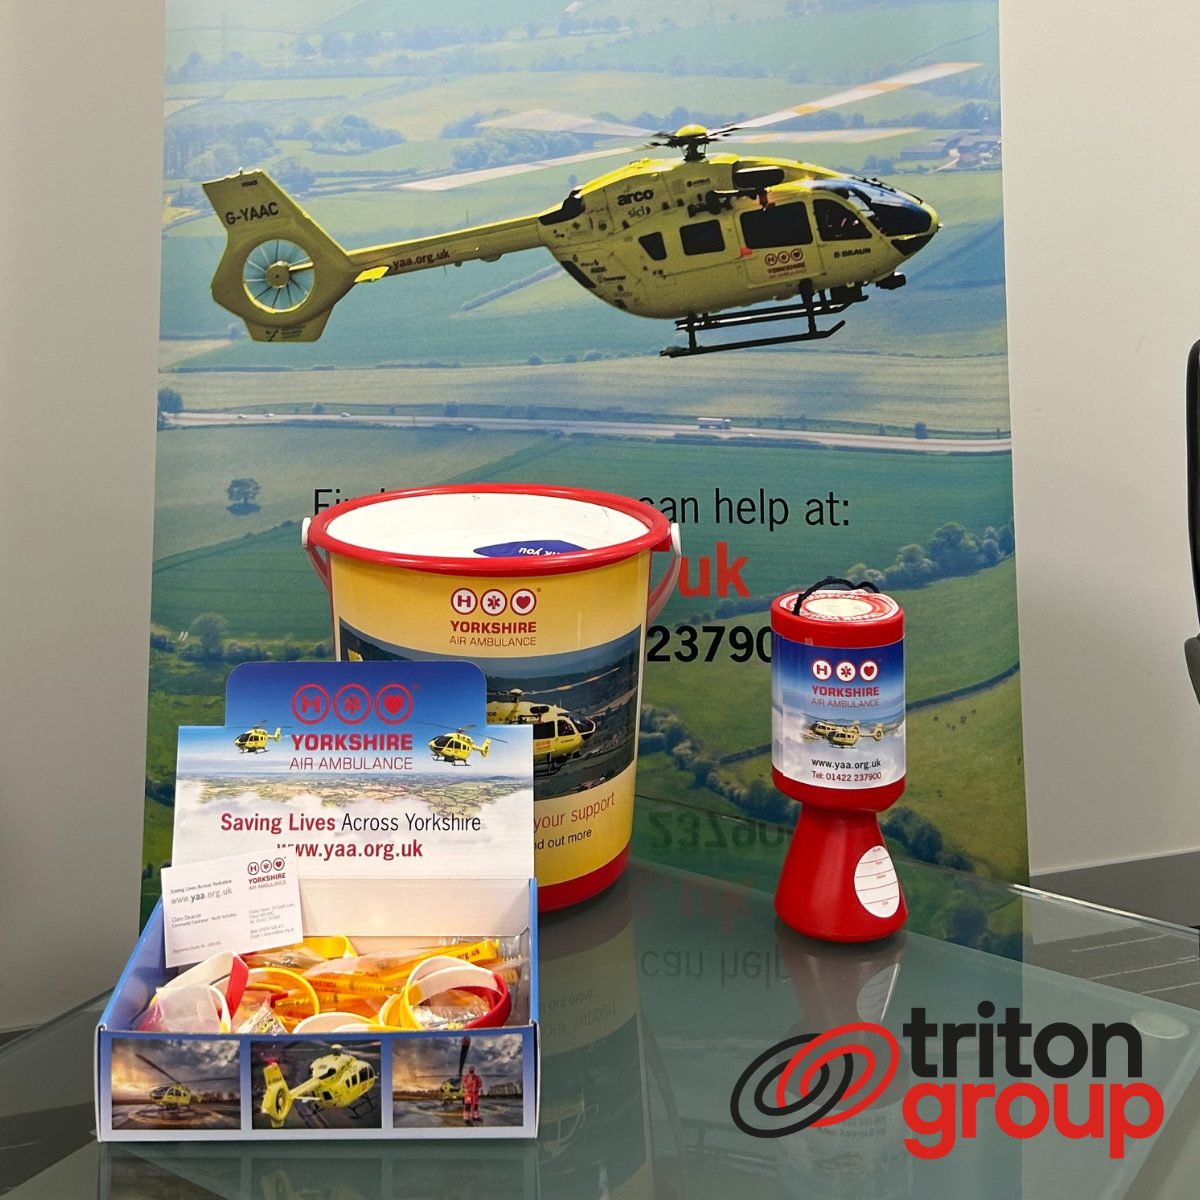 Triton Group are Supporting Yorkshire Air Ambulance